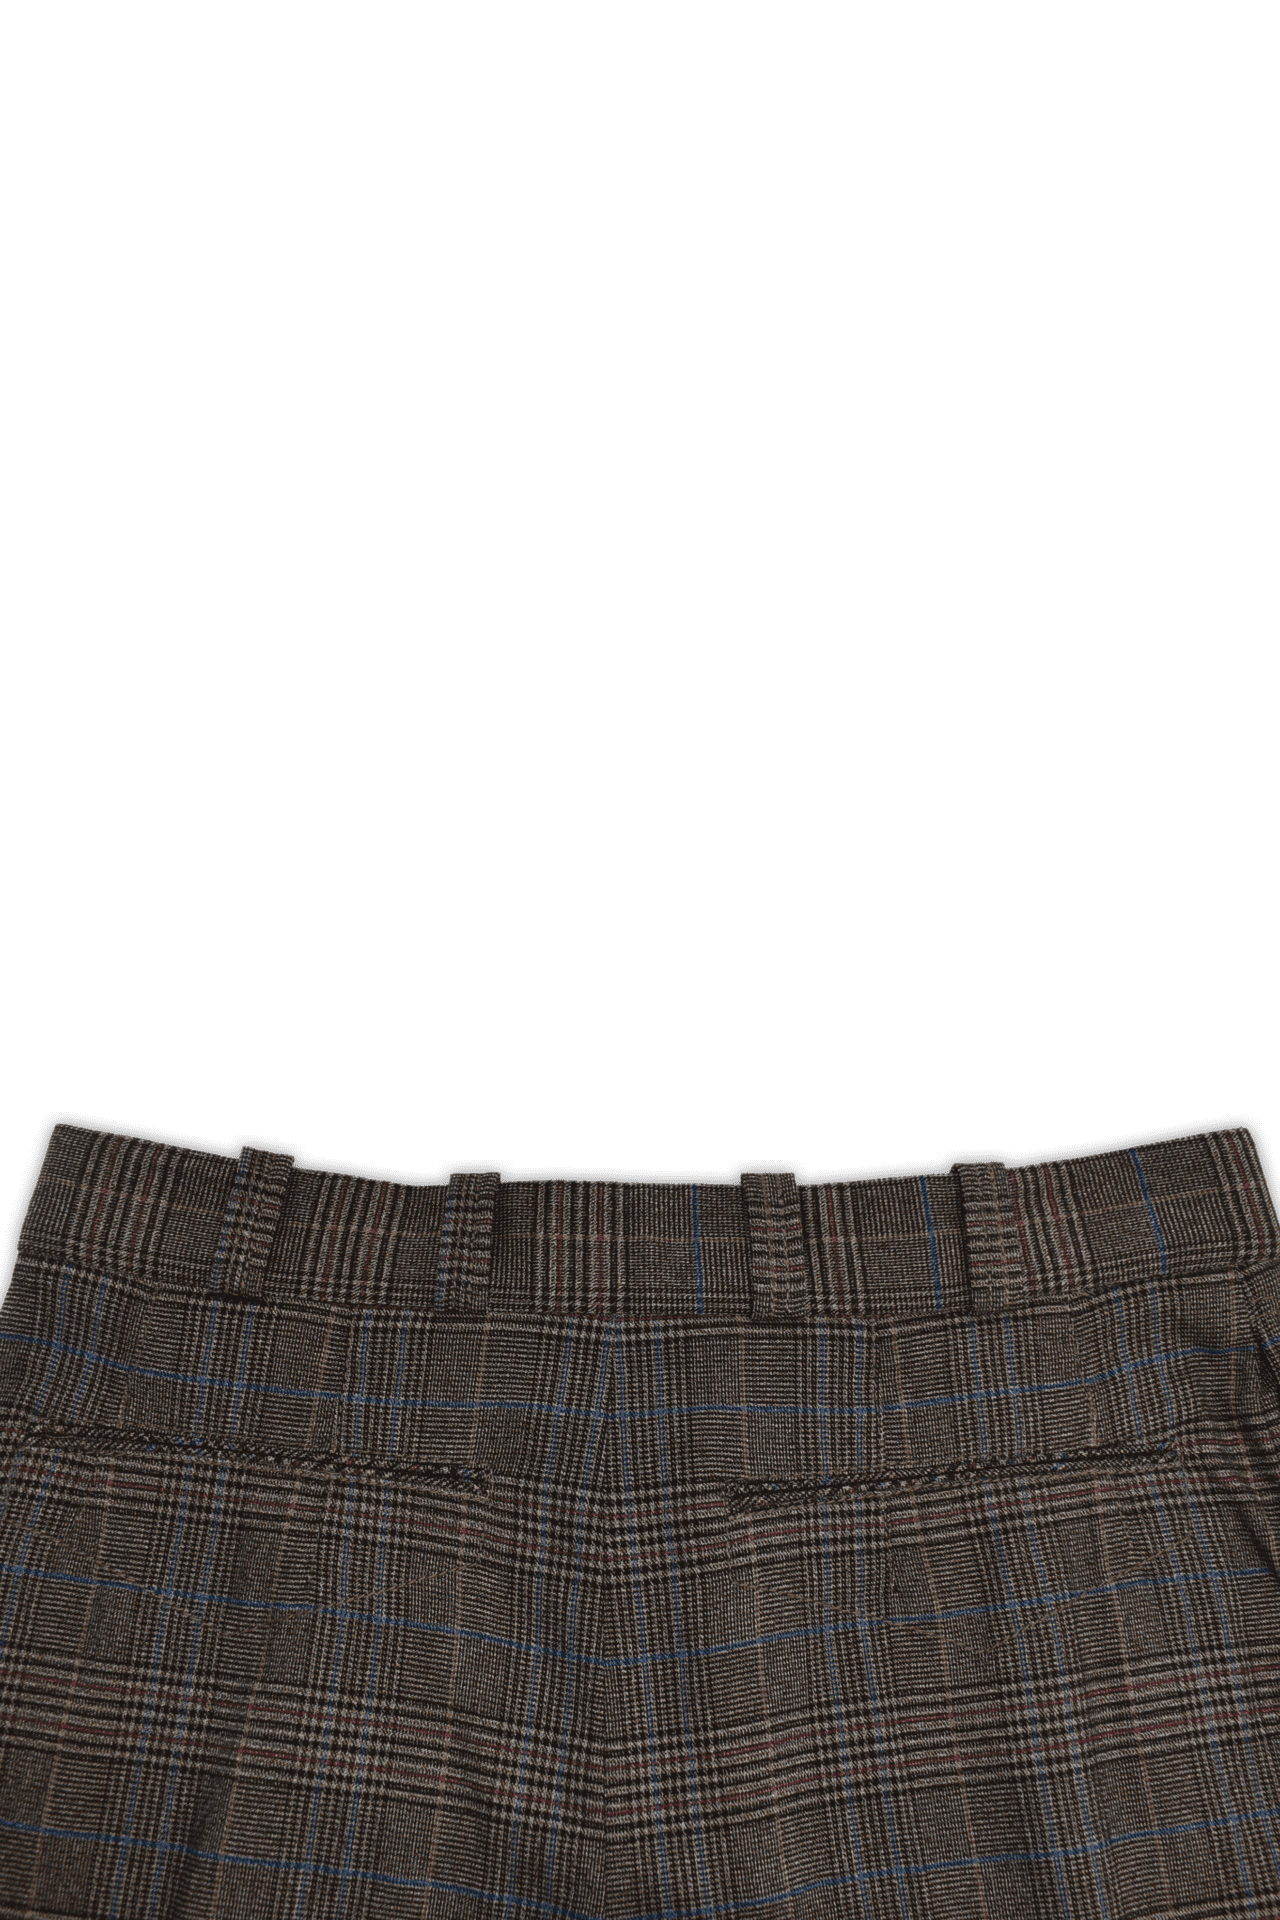 Tartan Karen Walker Pants featuring tailored fly front, belt loops, two front inseam and two back double jetted pockets.